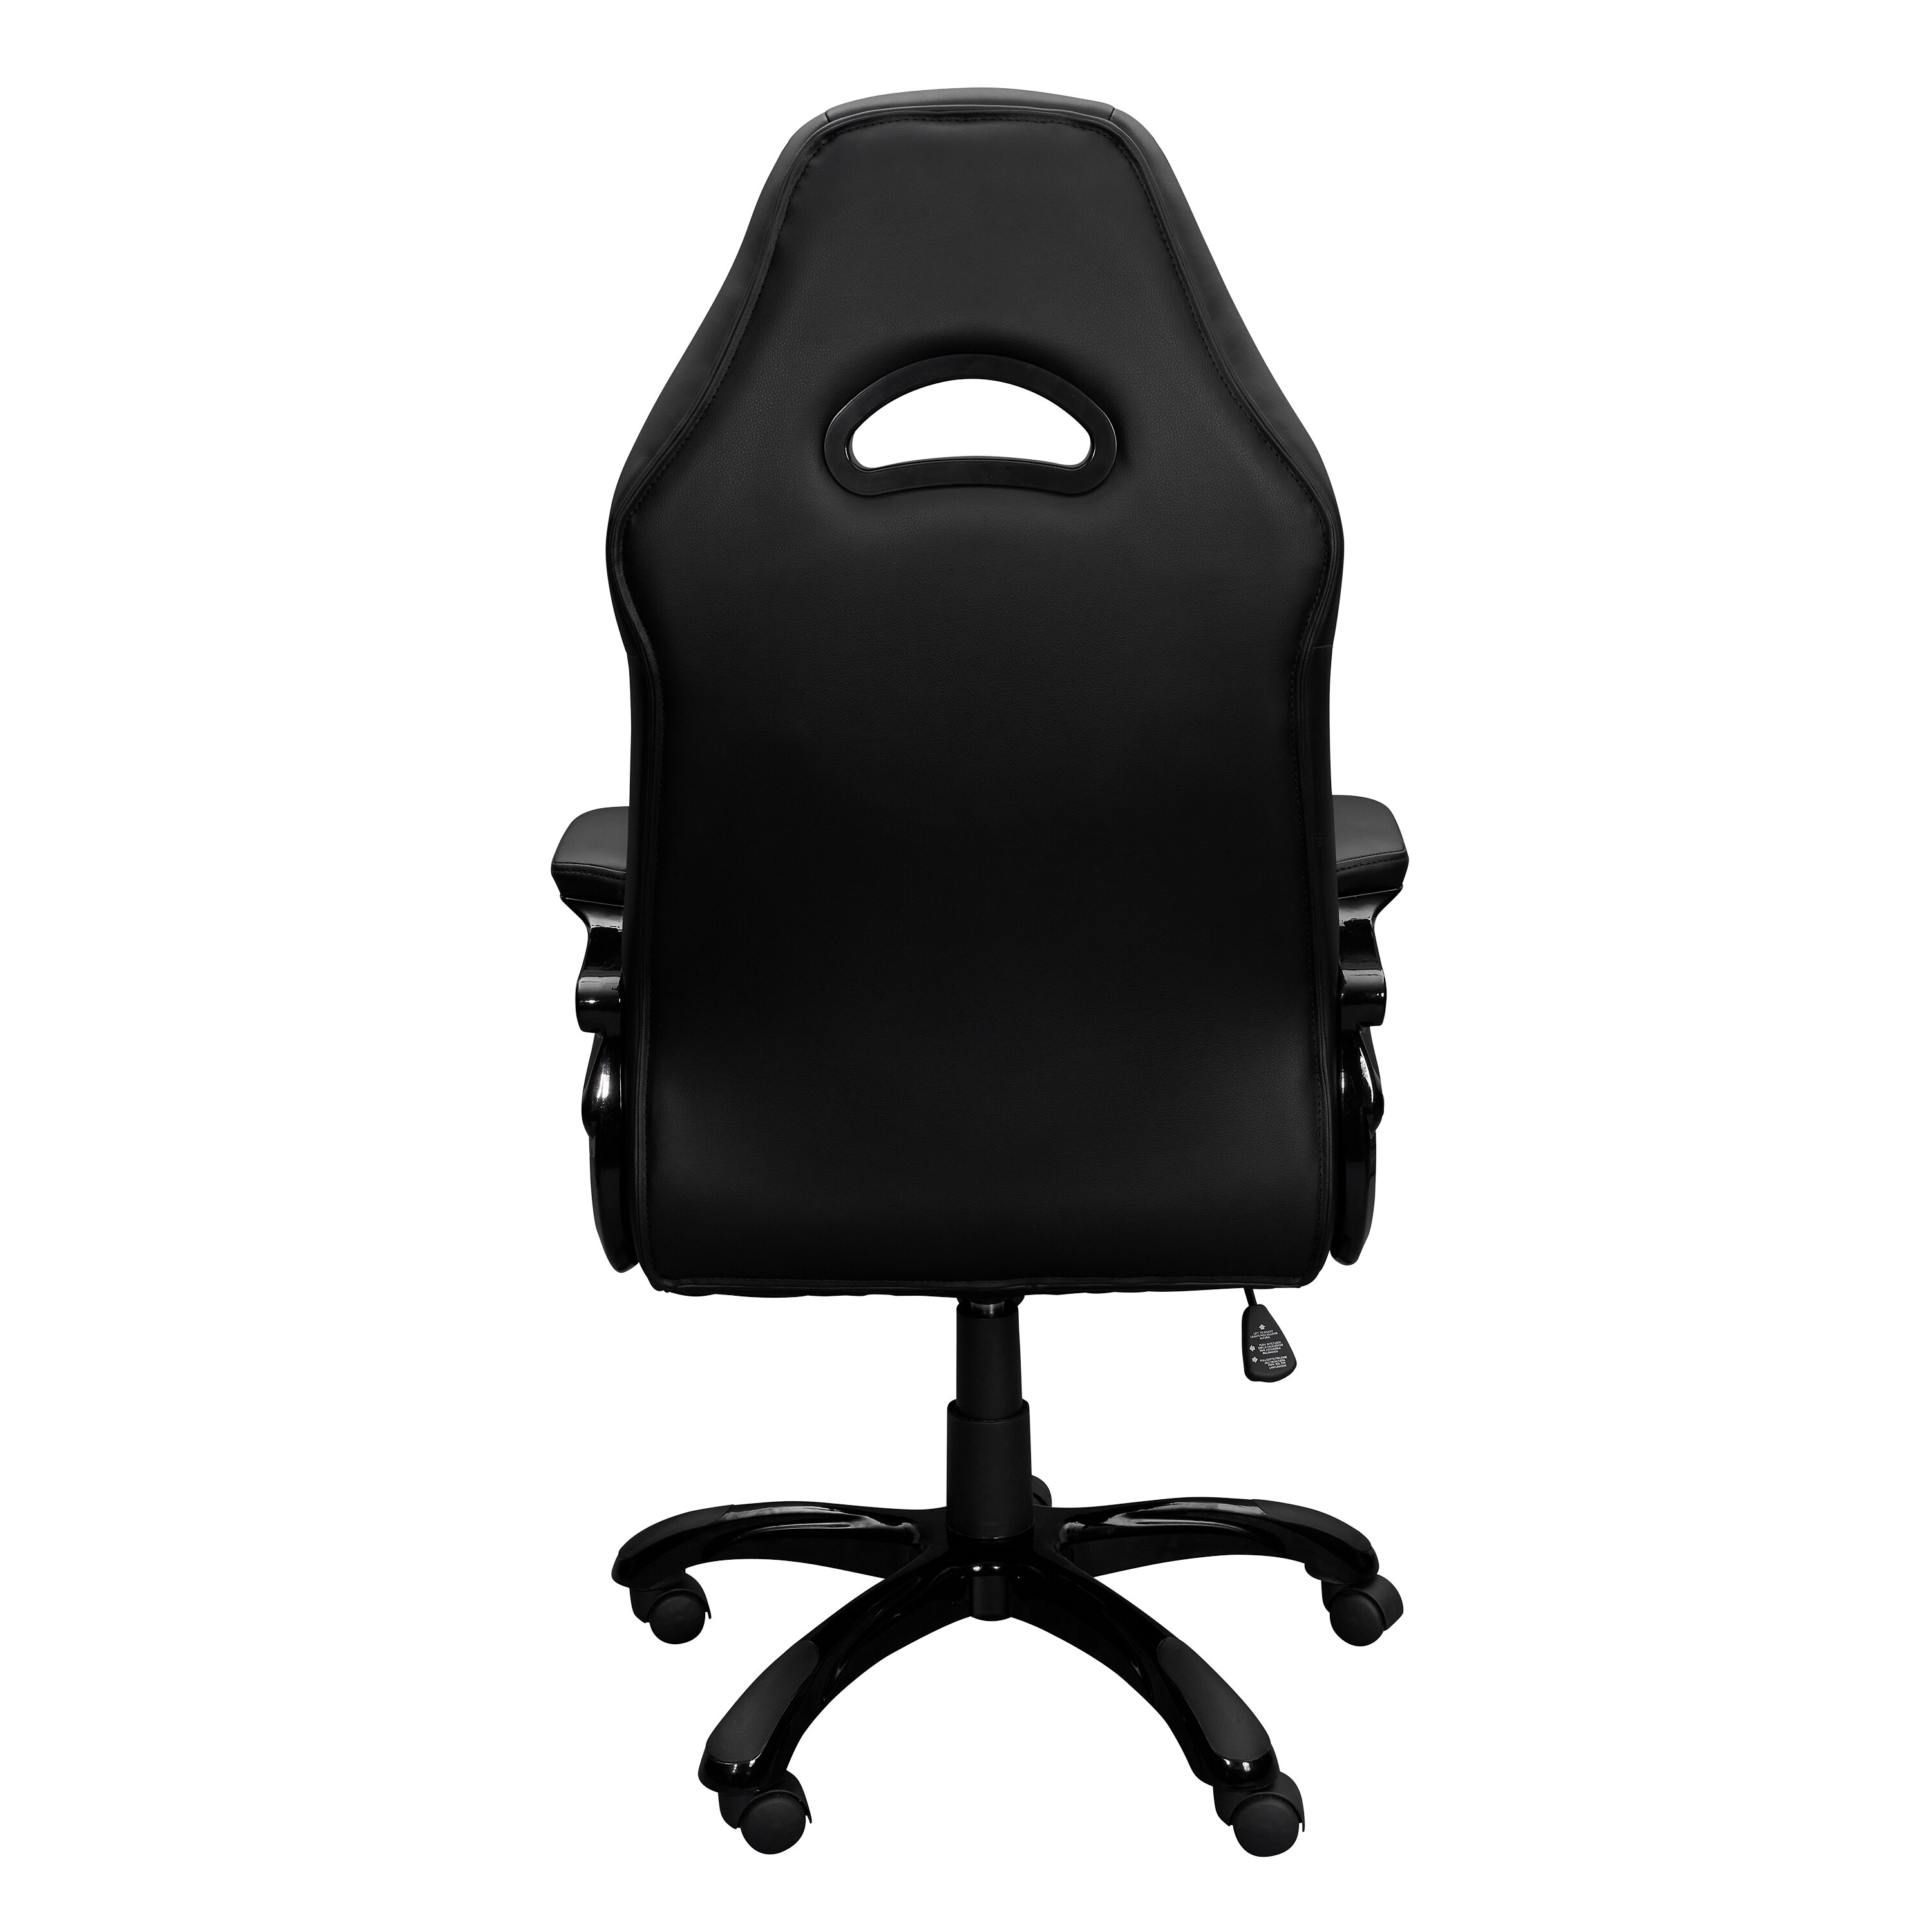 Ergonomic Adjustable Sport Race Office Chair with Locking Tilt Modern High Back Swivel Executive Chairs with Casters